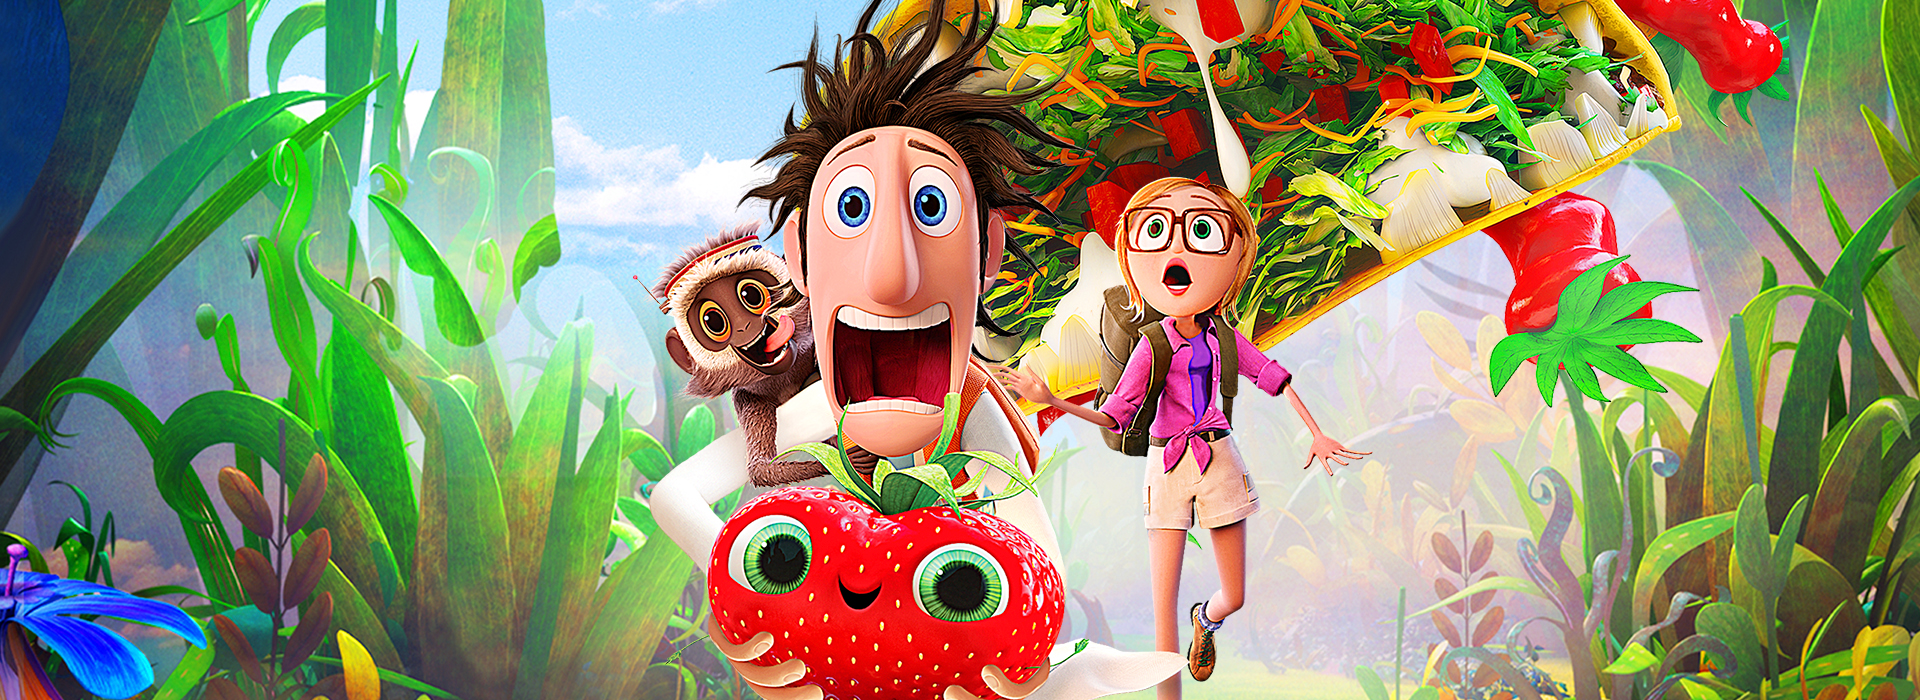 Movie poster Cloudy with a Chance of Meatballs 2